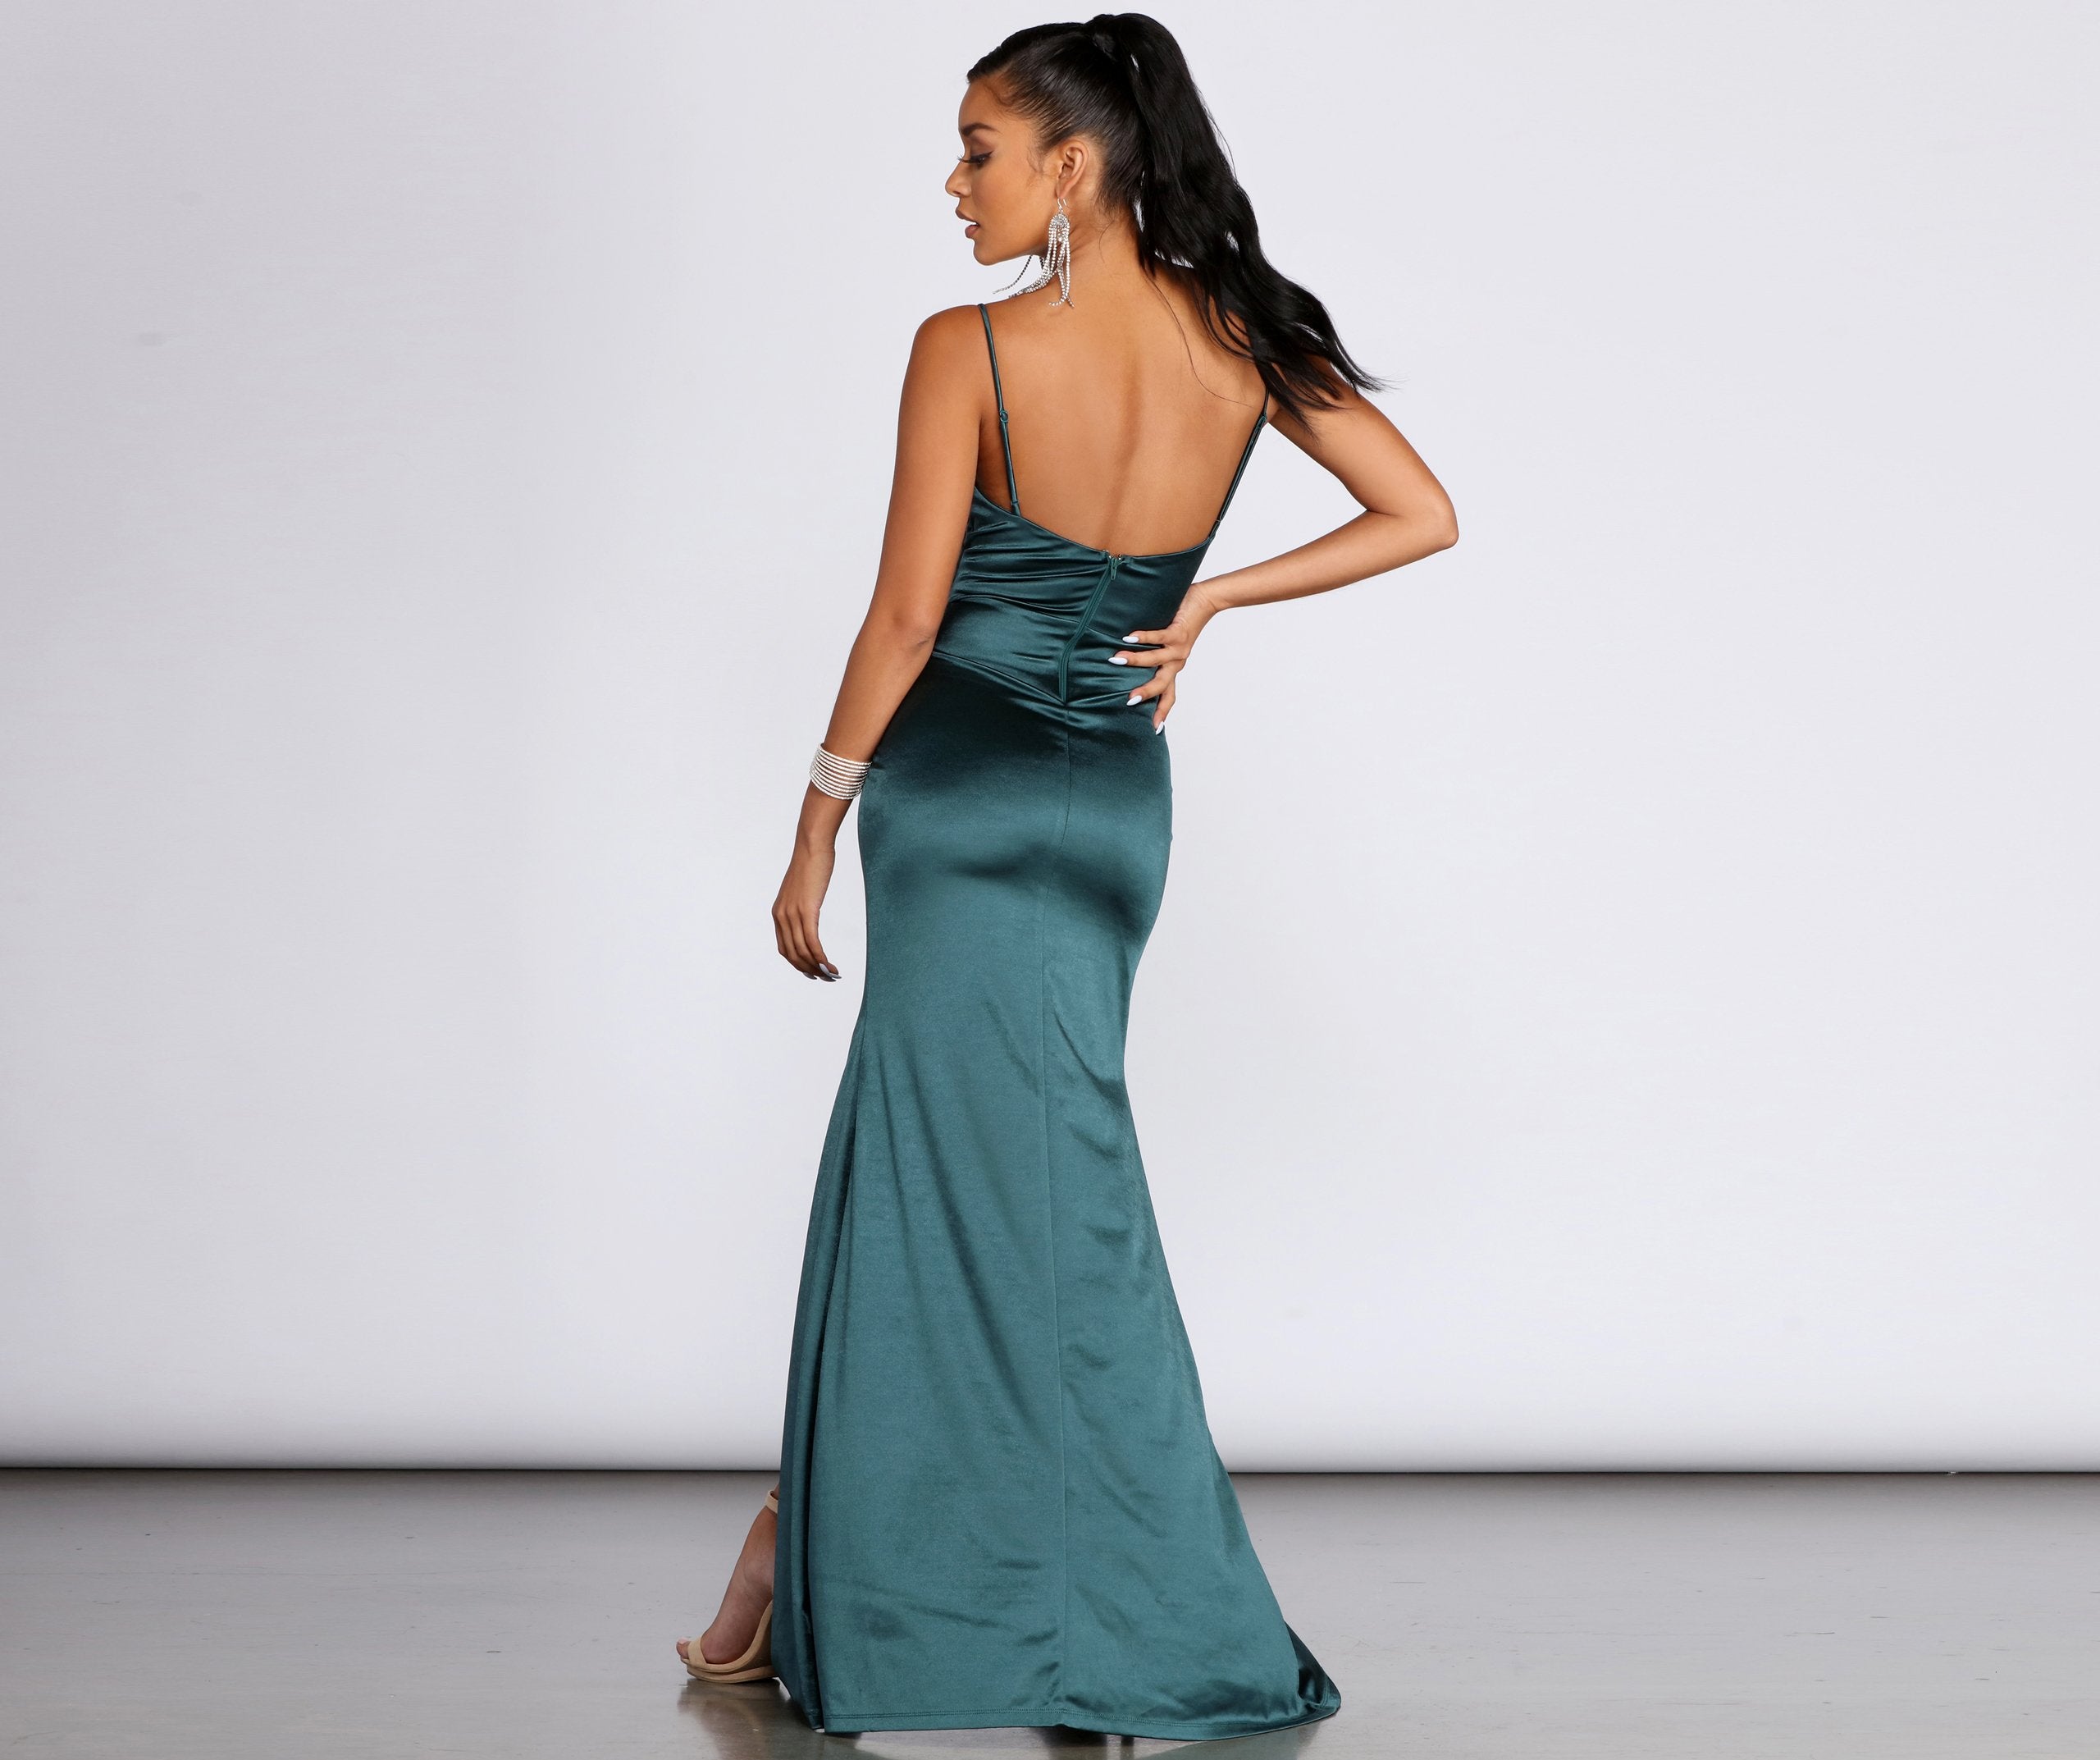 Karen Satin Wrap Formal Gown - Lady Occasions